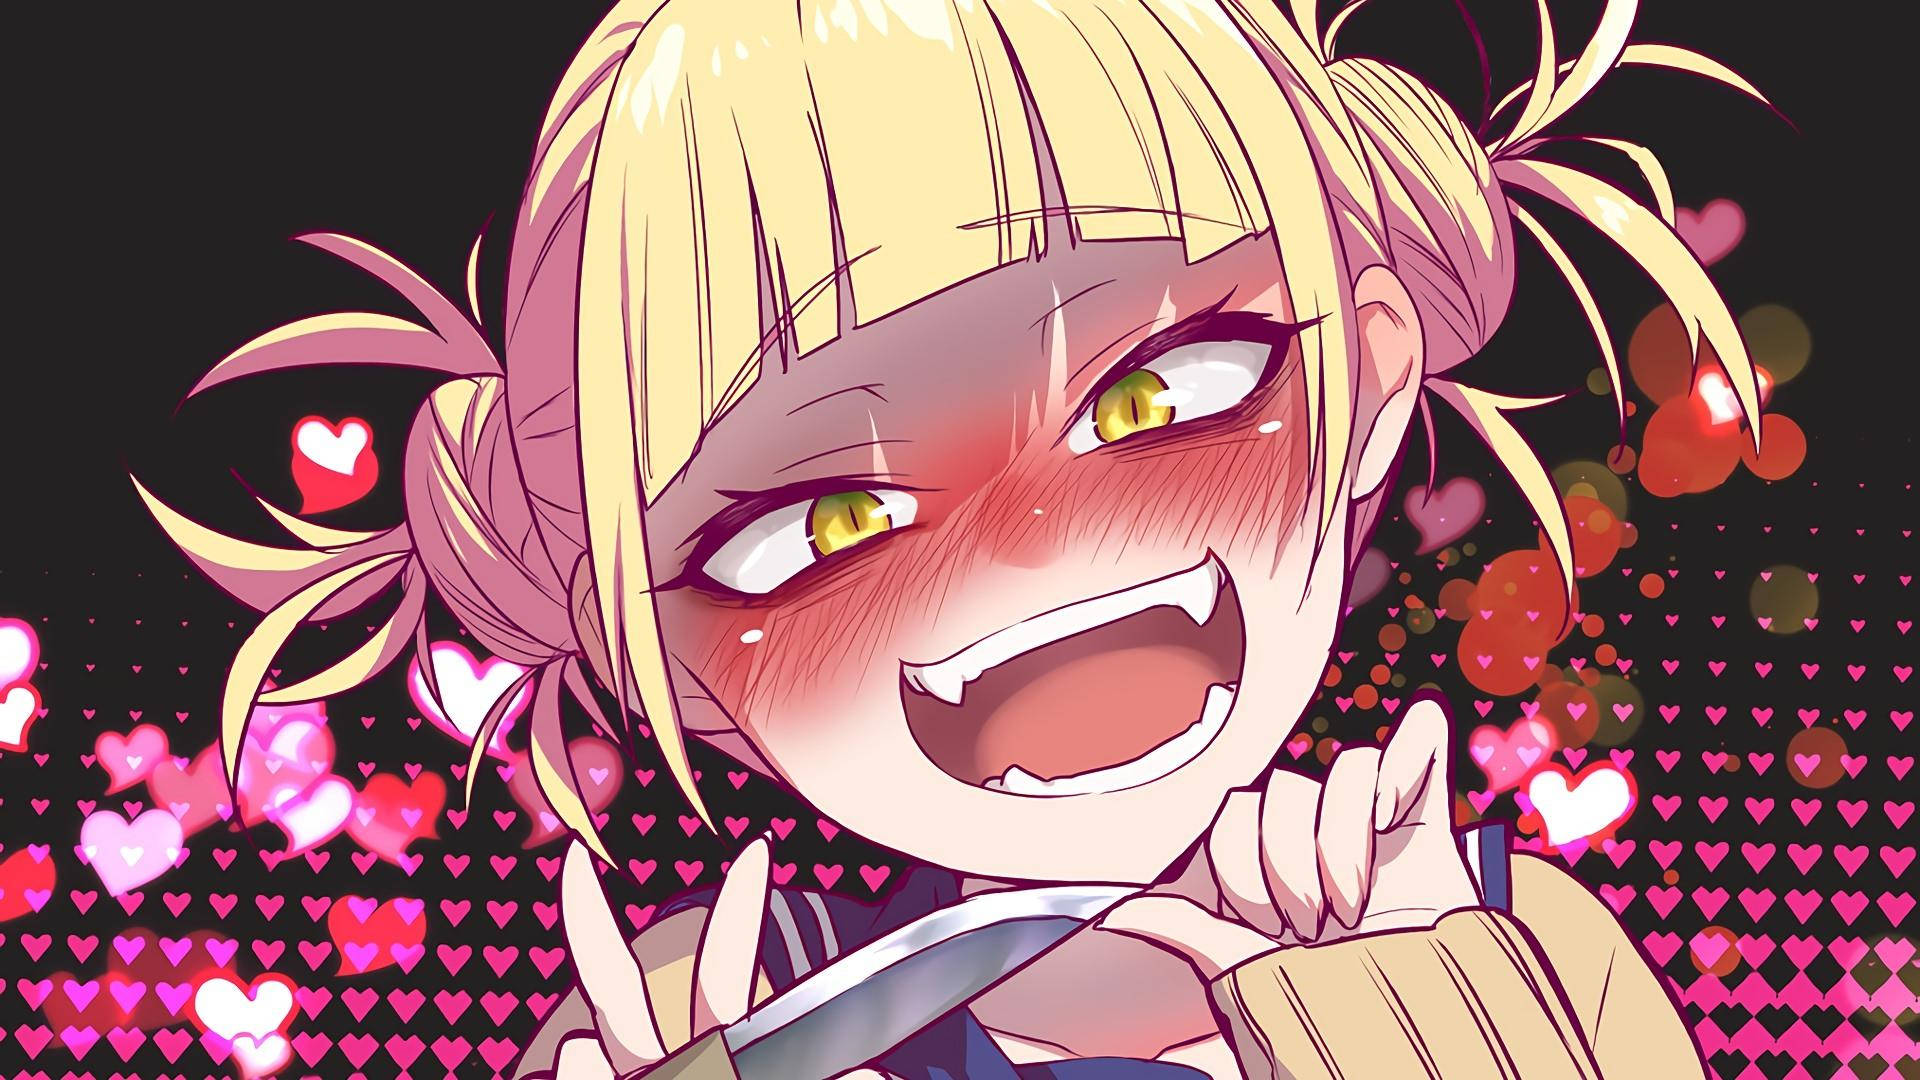 Himiko Toga With Hearts Background